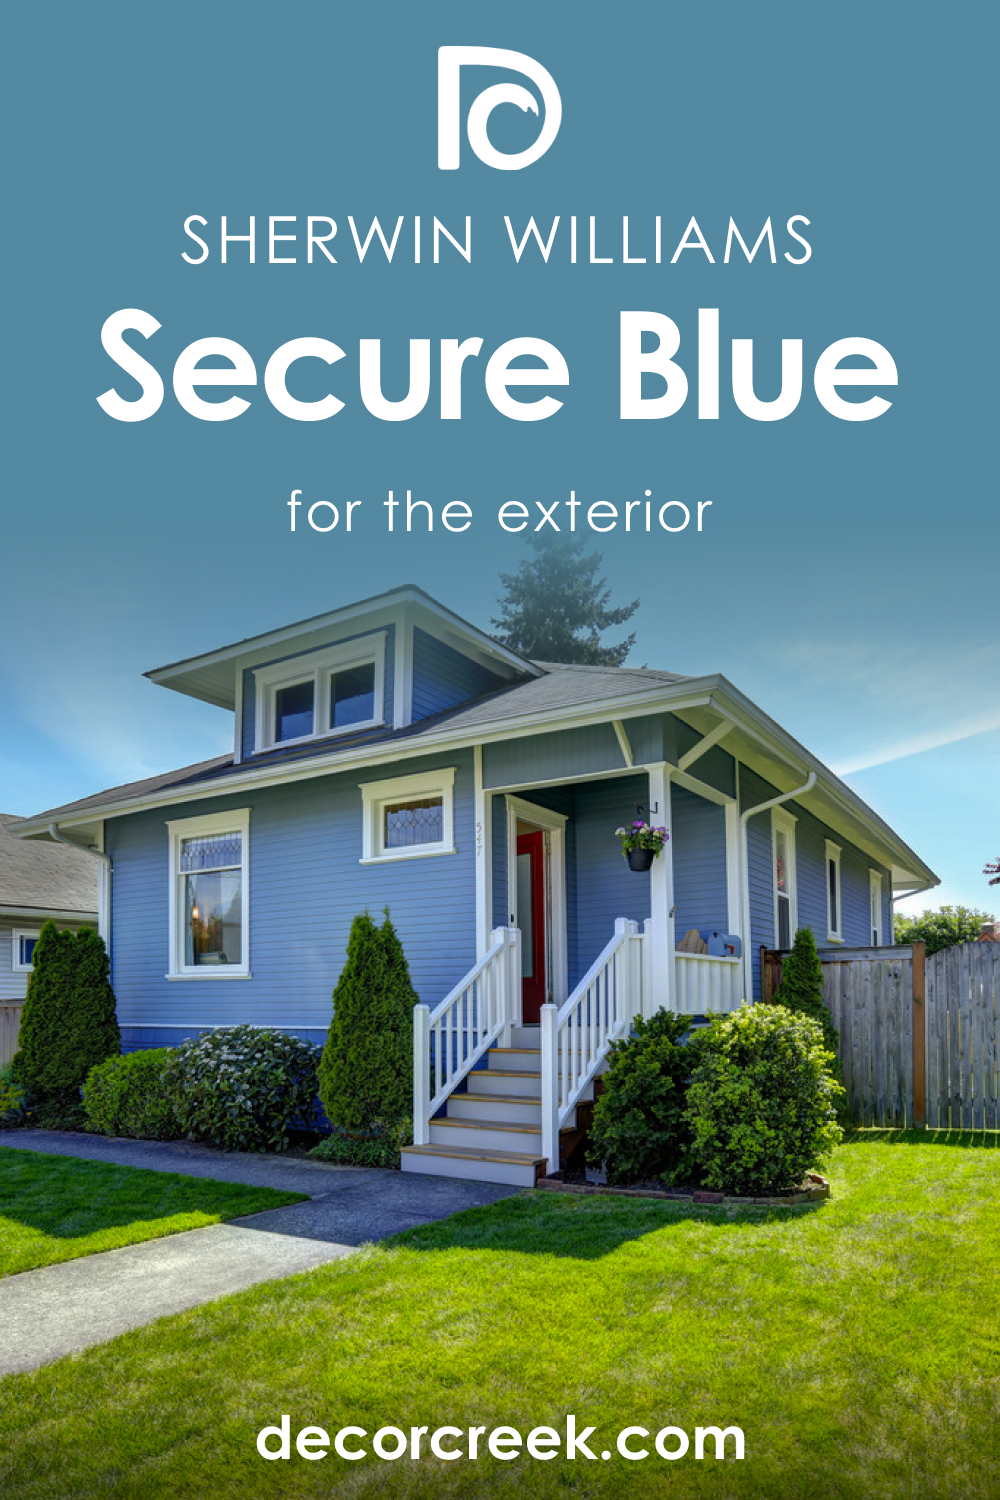 How to Use Secure Blue SW 6508 for an Exterior?